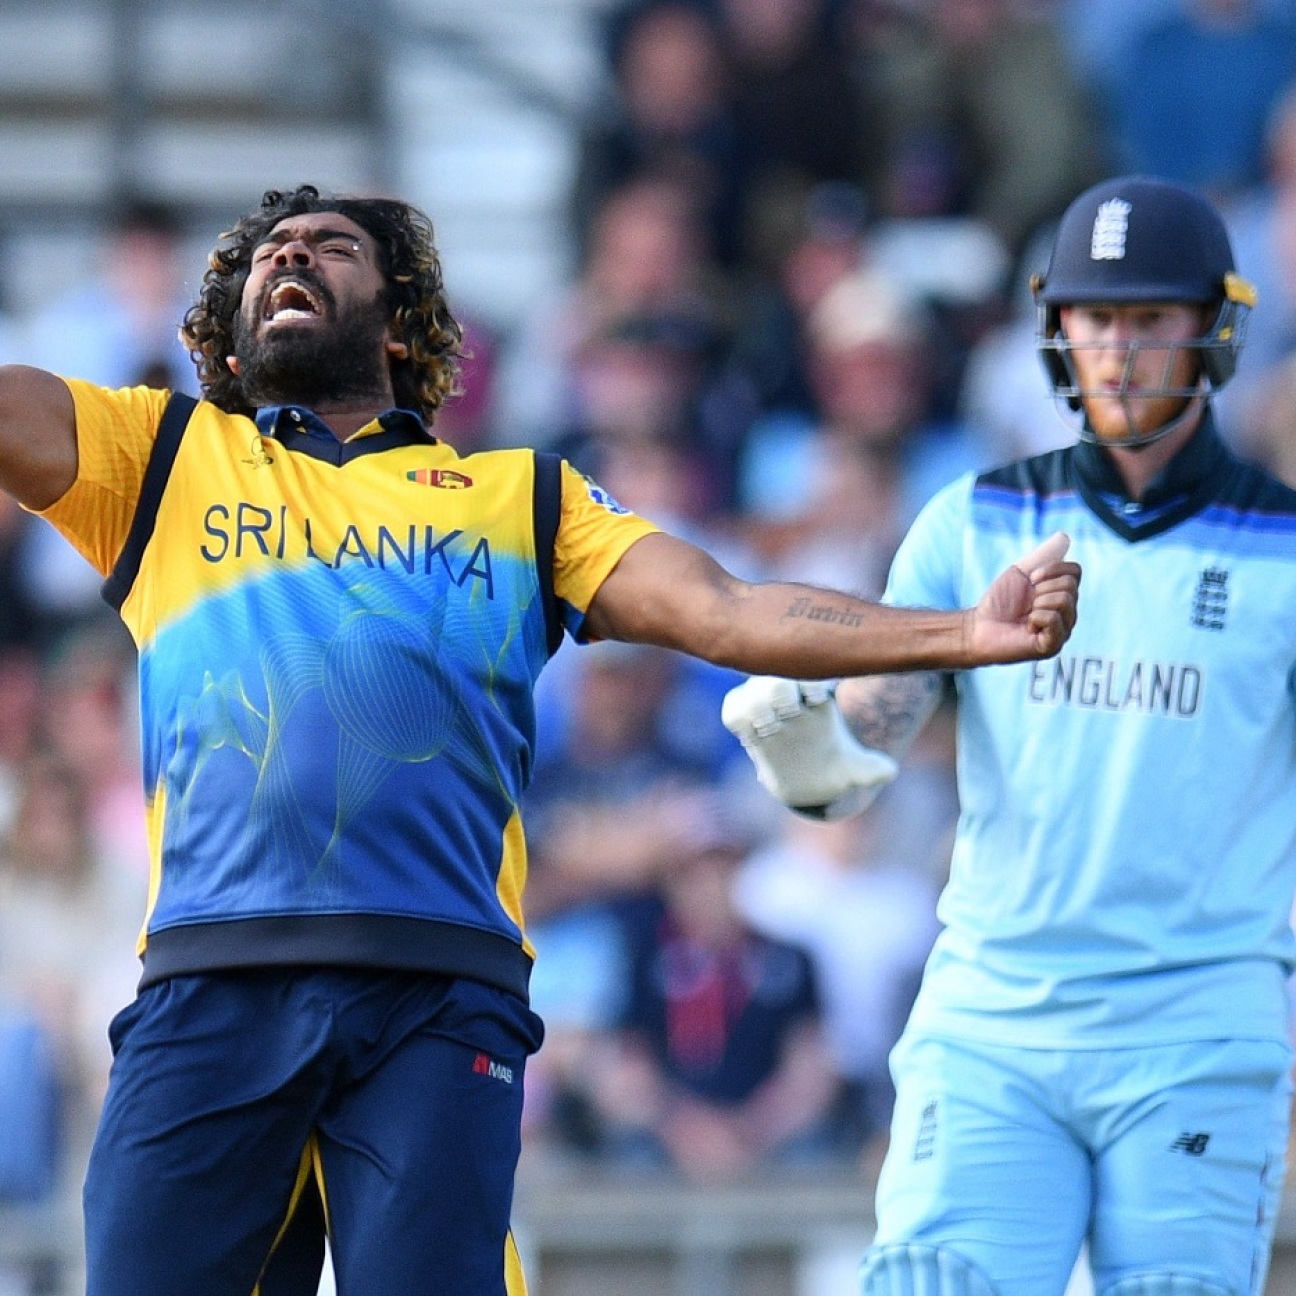 England Vs Sri Lanka : Where To Watch Eng Vs Sl Live Streaming And Tv Details Fixture List For England Vs Sri Lanka / After a thorough analysis of stats, recent form and h2h through betclan's algorithm, as well as, tipsters advice for the match england vs sri lanka this is our prediction: